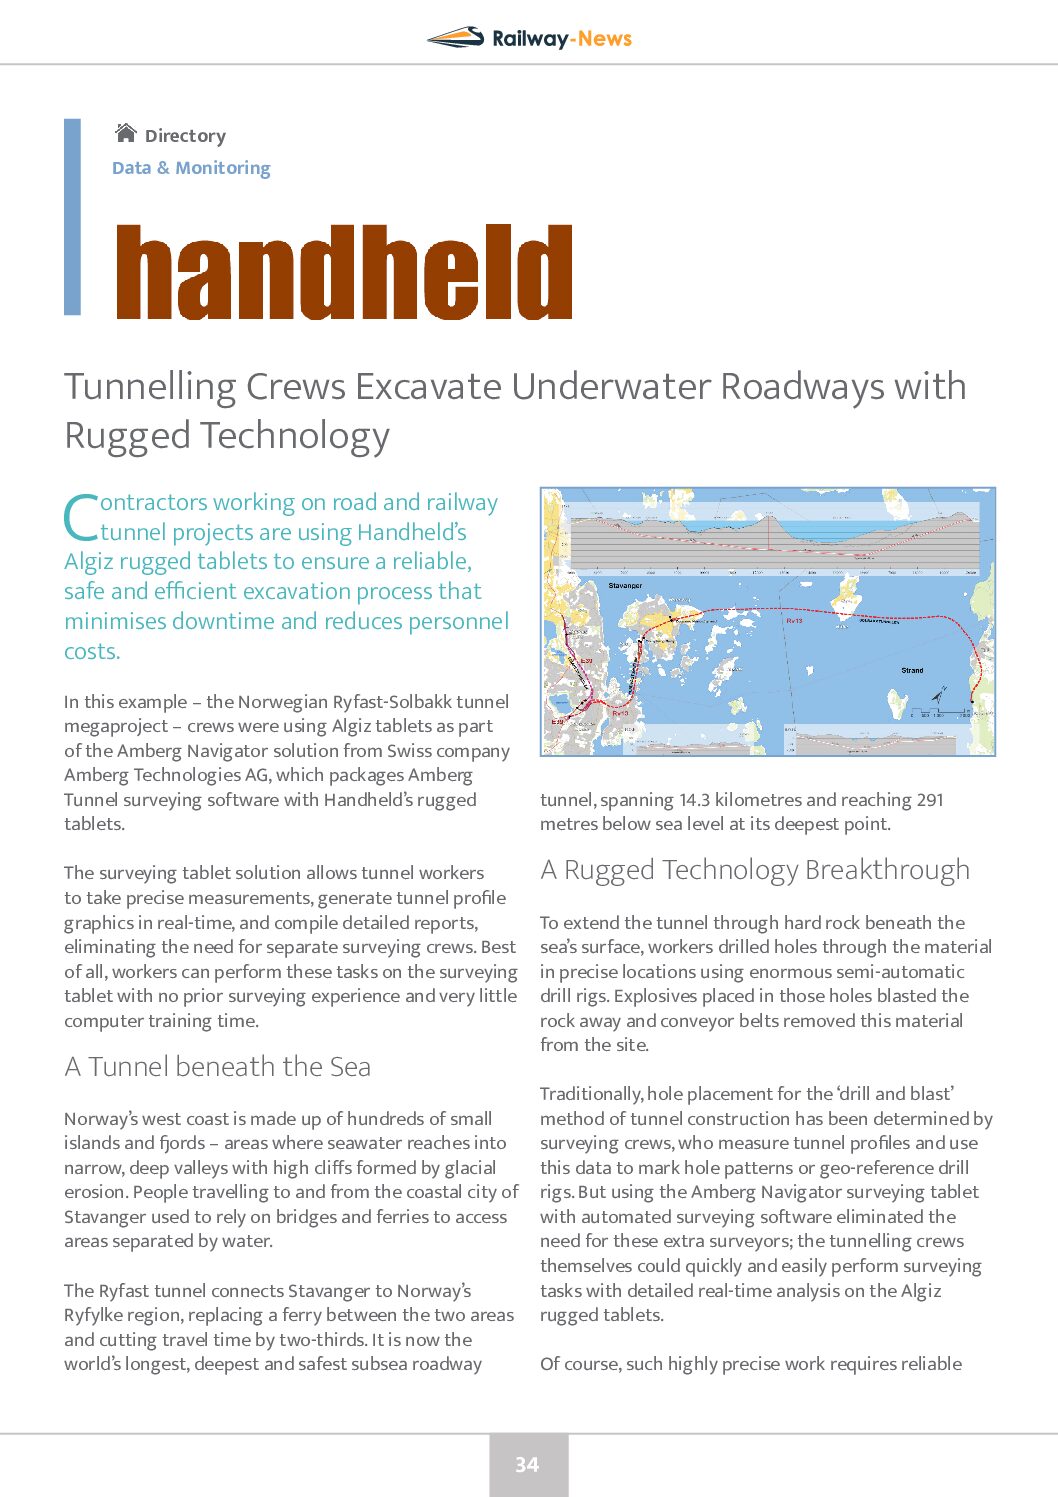 Tunnelling Crews Excavate Underwater Roadways with Rugged Technology